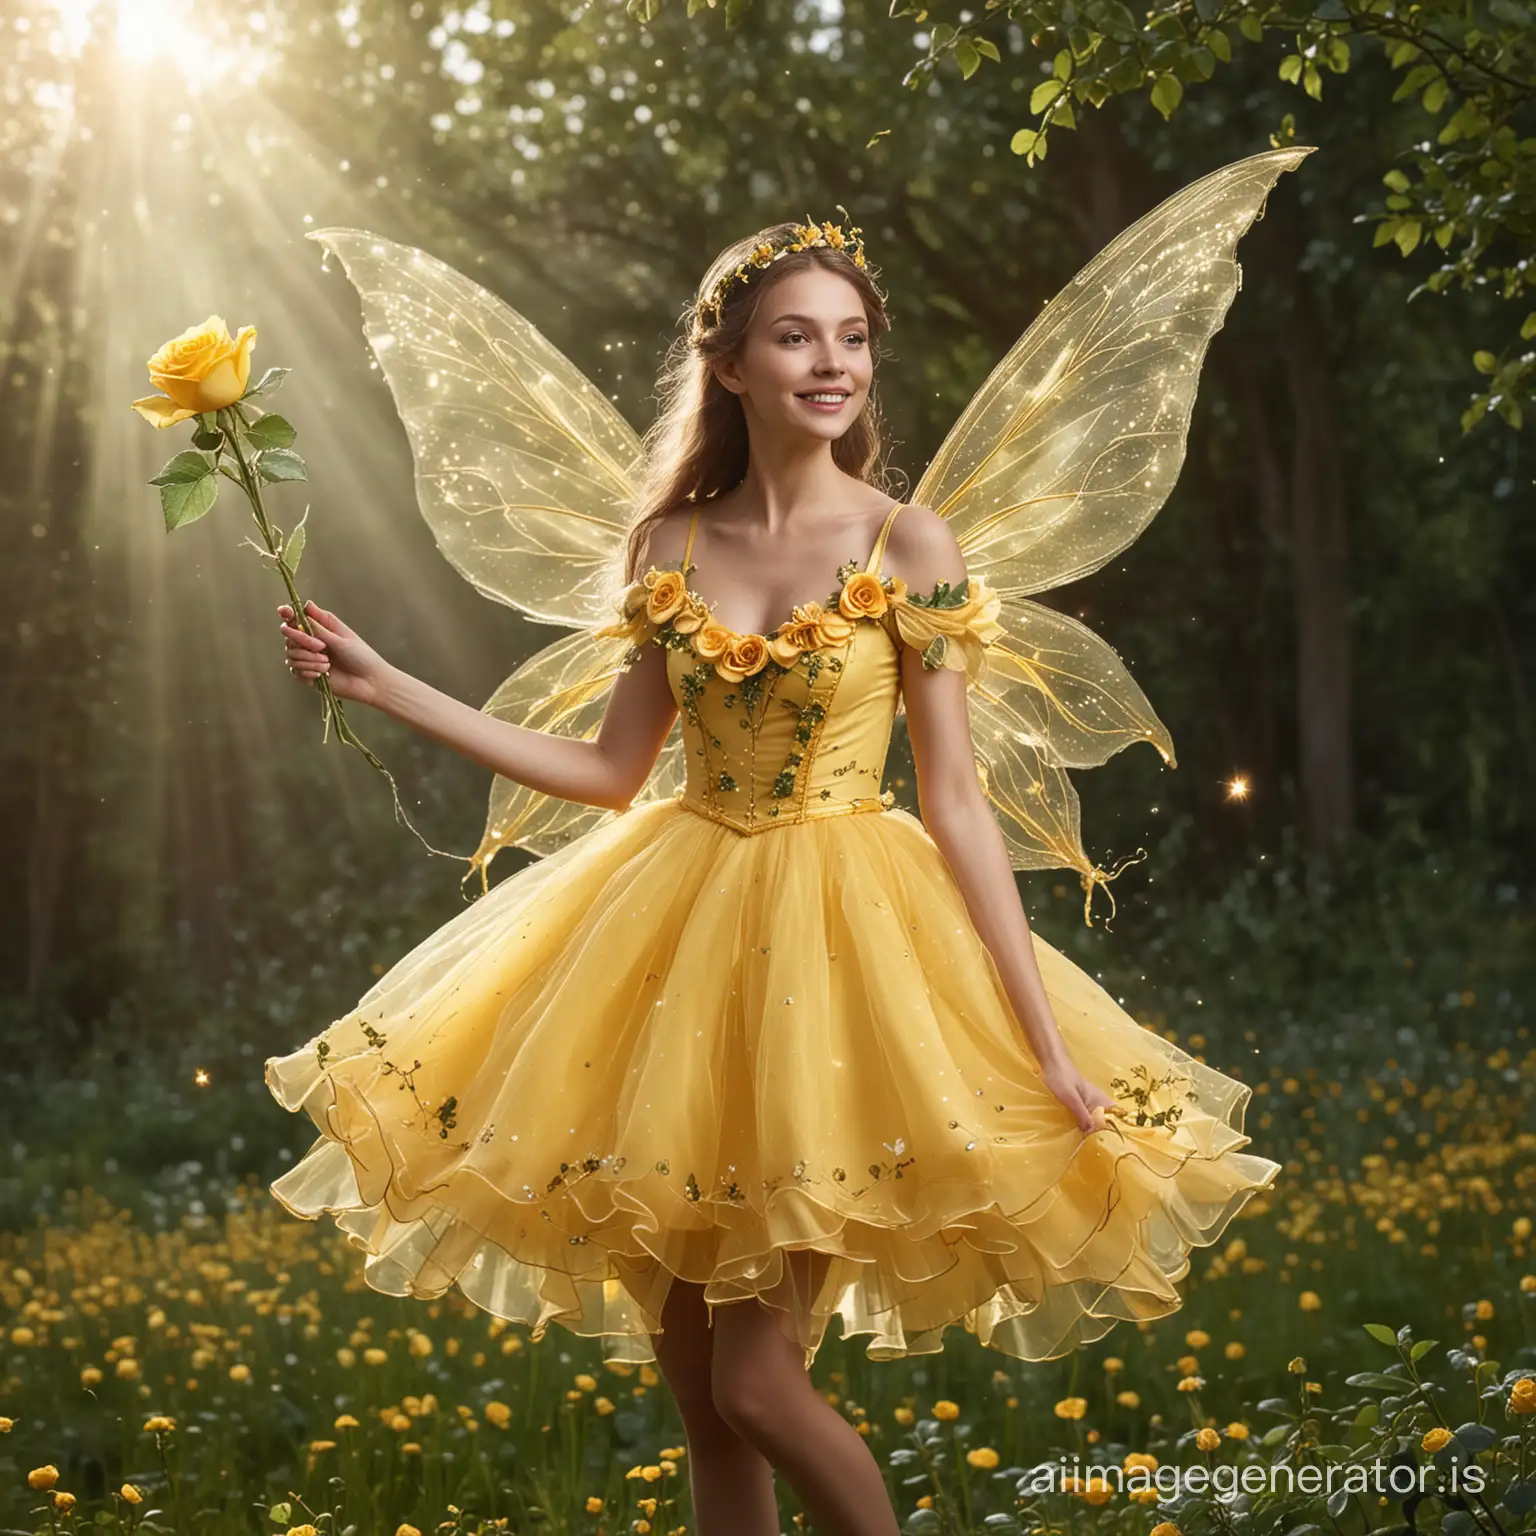 a fairy wearing a rose-shaped dress and holding a yellow magic wand